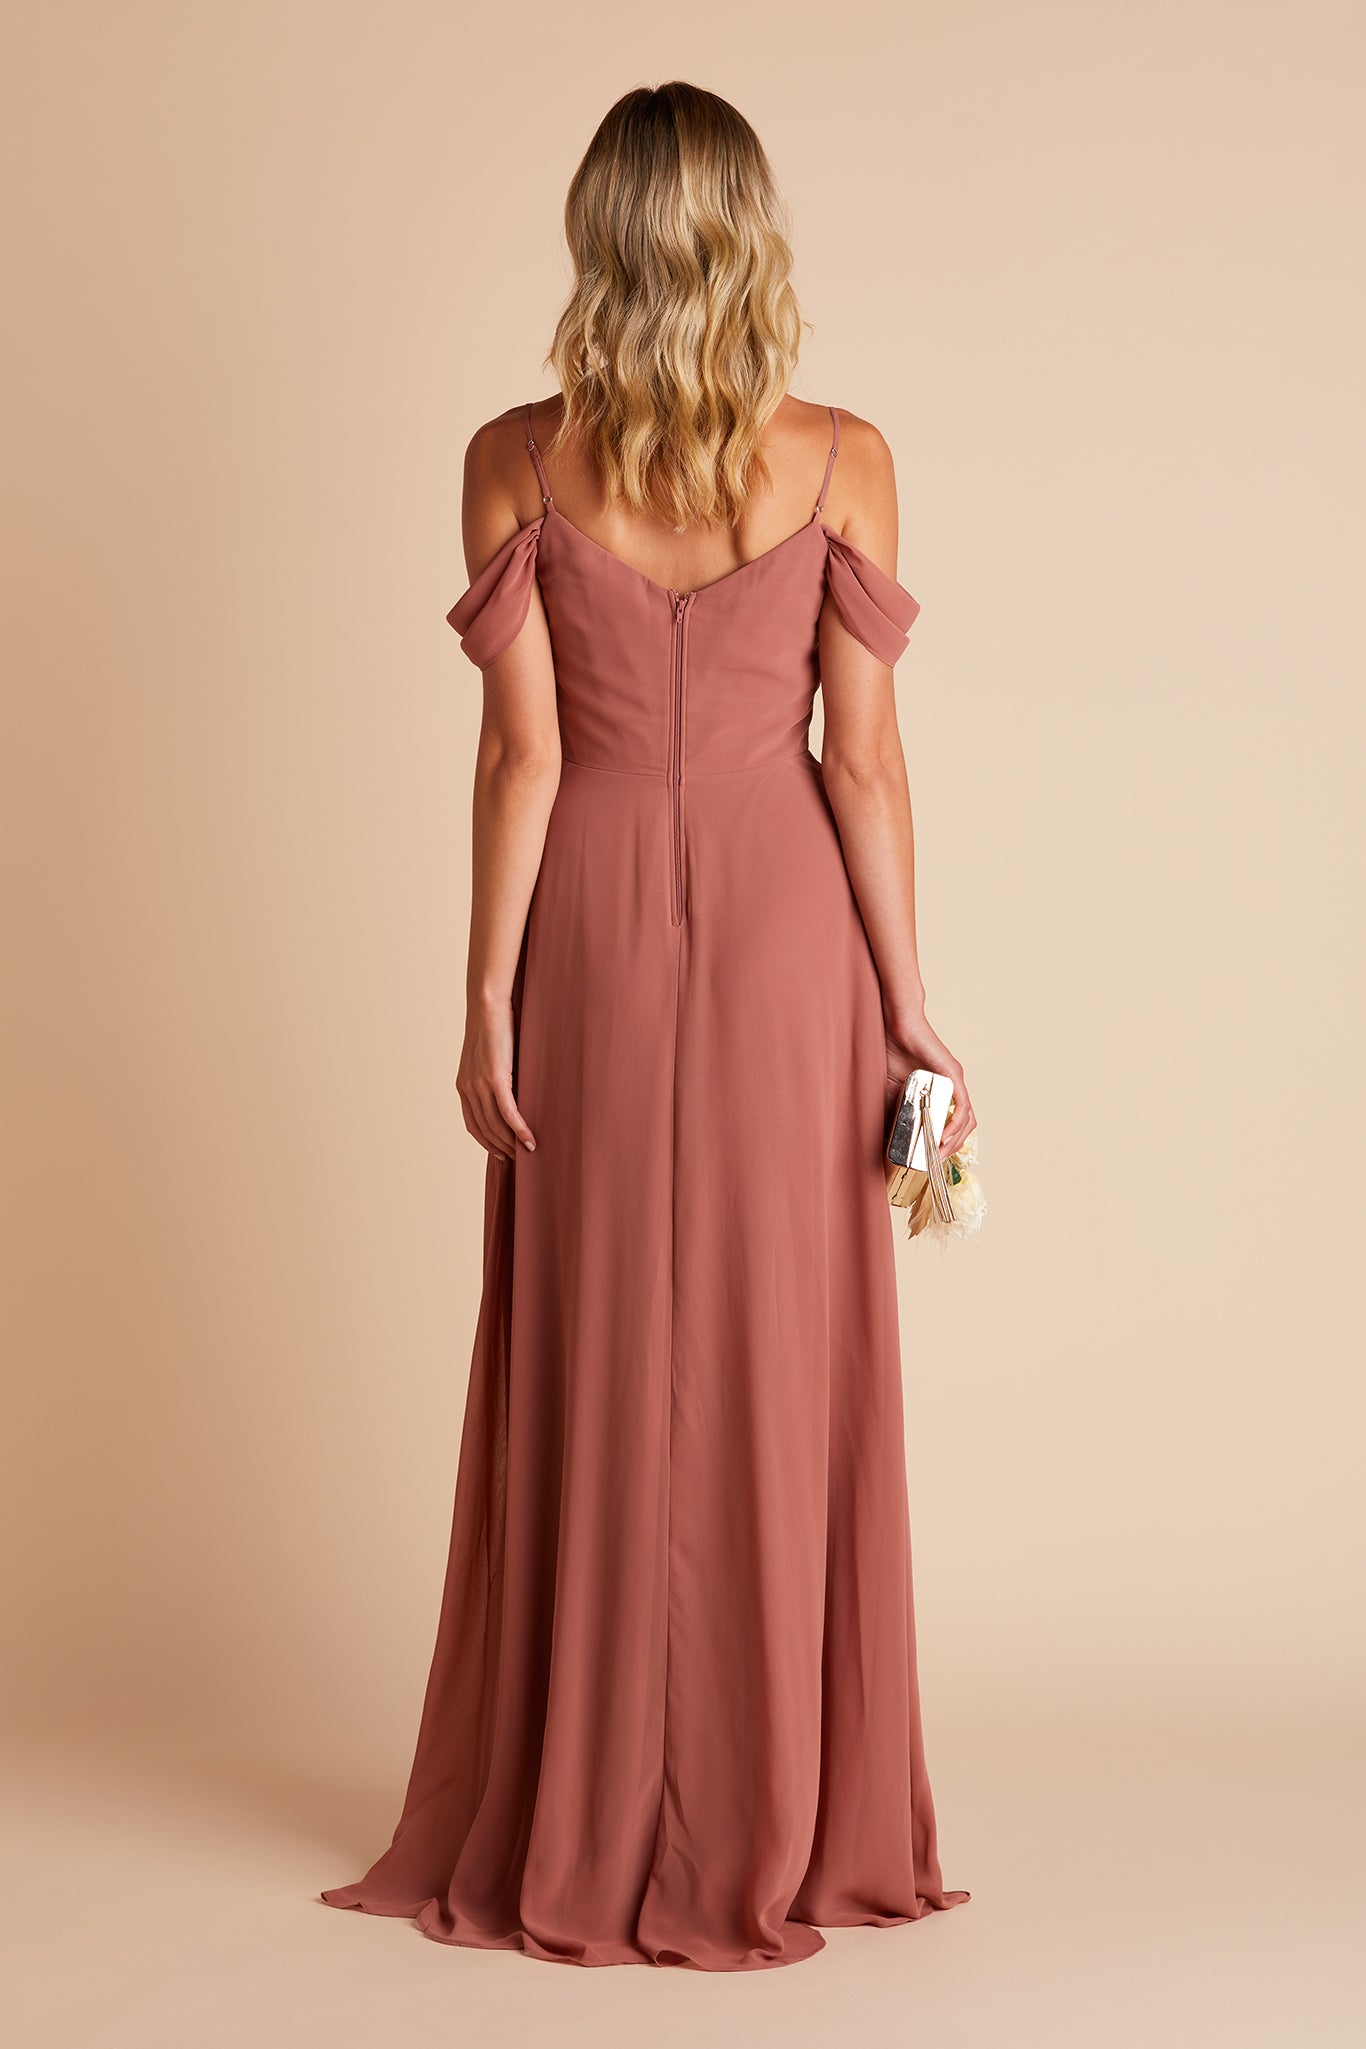 Devin convertible bridesmaid dress with slit in desert rose chiffon by Birdy Grey, back view